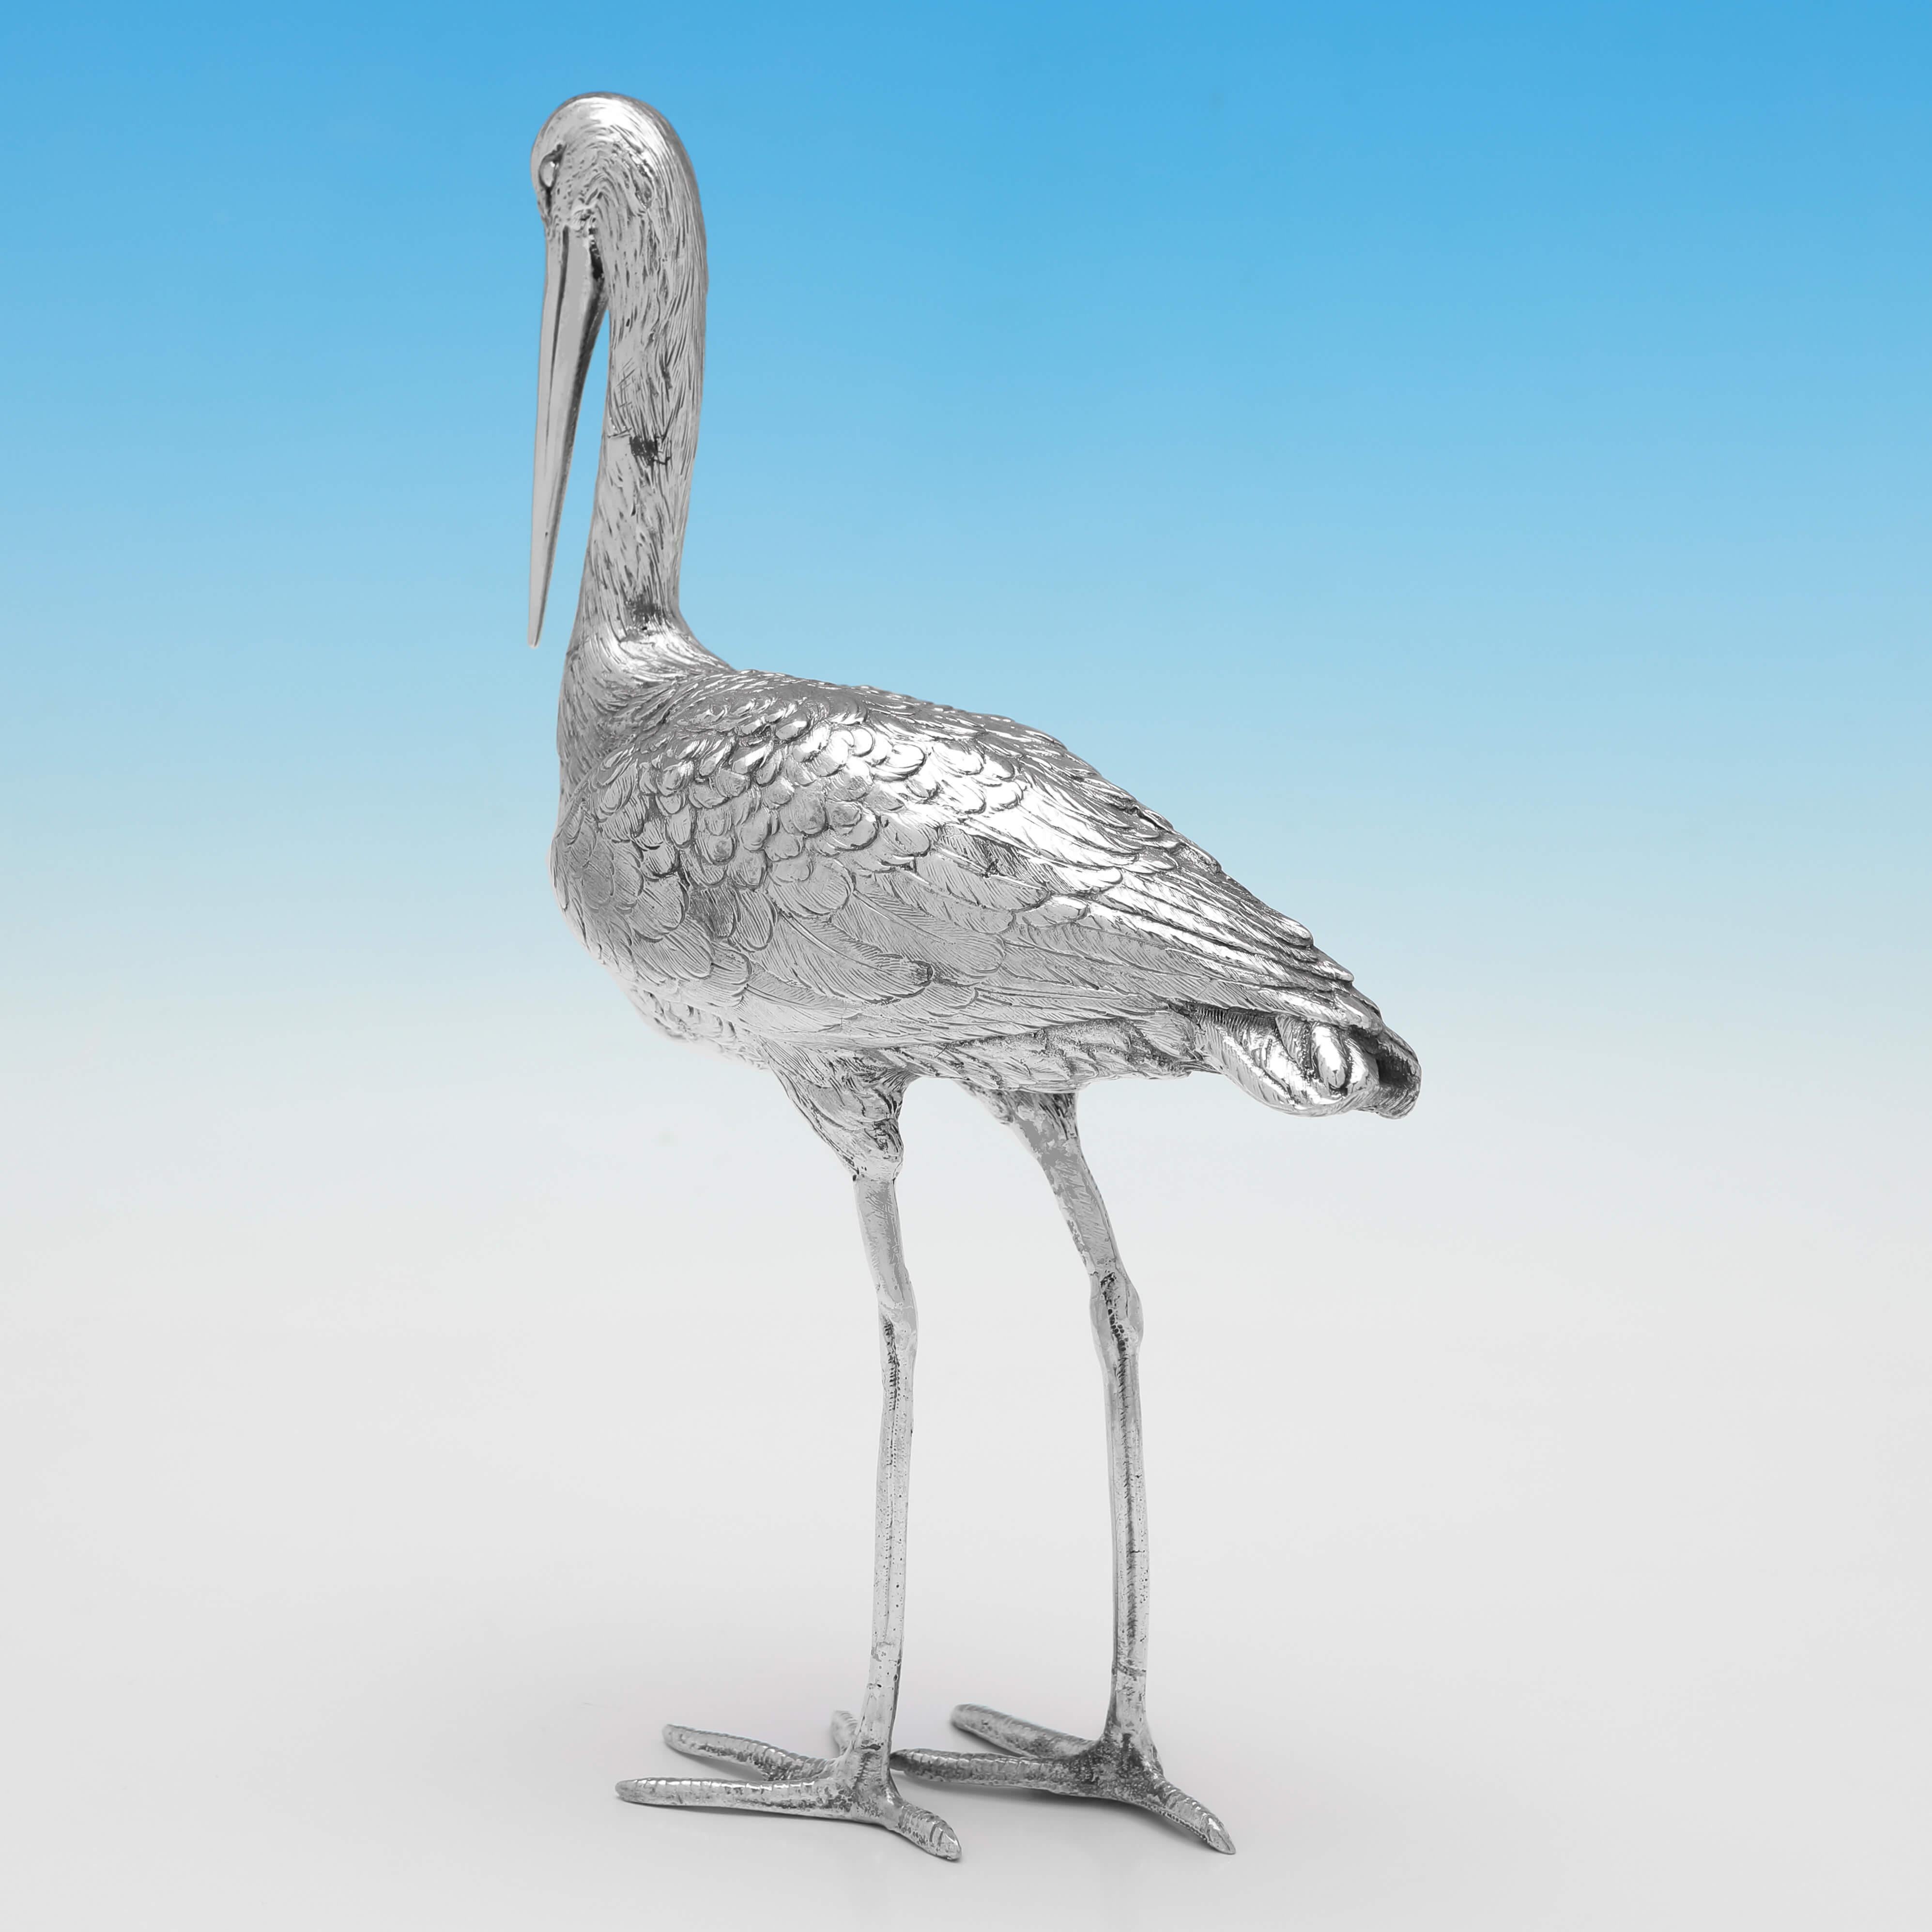 English Edwardian Antique Sterling Silver Model of a Stork by Berthold Muller in 1908 For Sale